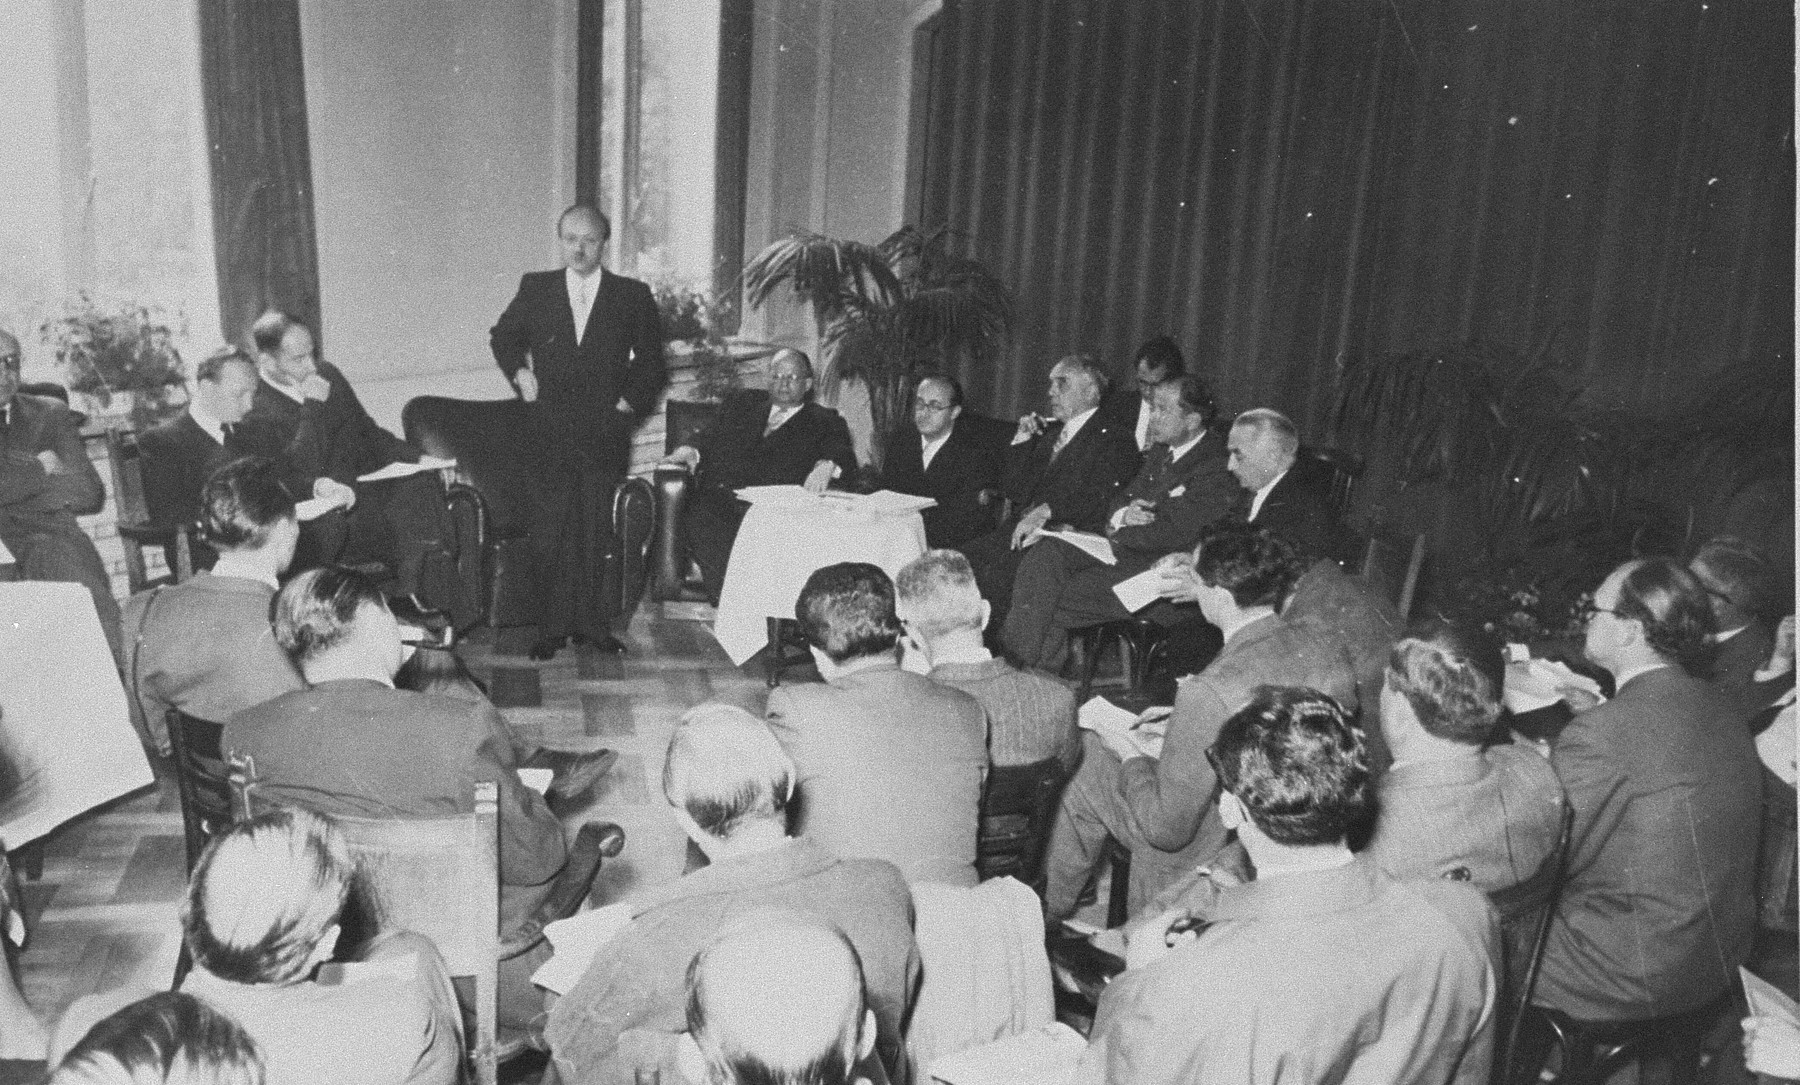 A briefing by members of the Conference on Jewish Material Claims in Luxembourg during the signing of the Reparations Agreement between the German Federal Republic, the State of Israel, and the Conference on Jewish Material Claims.  

Among those pictured is Benjamin Ferencz (second from the left).